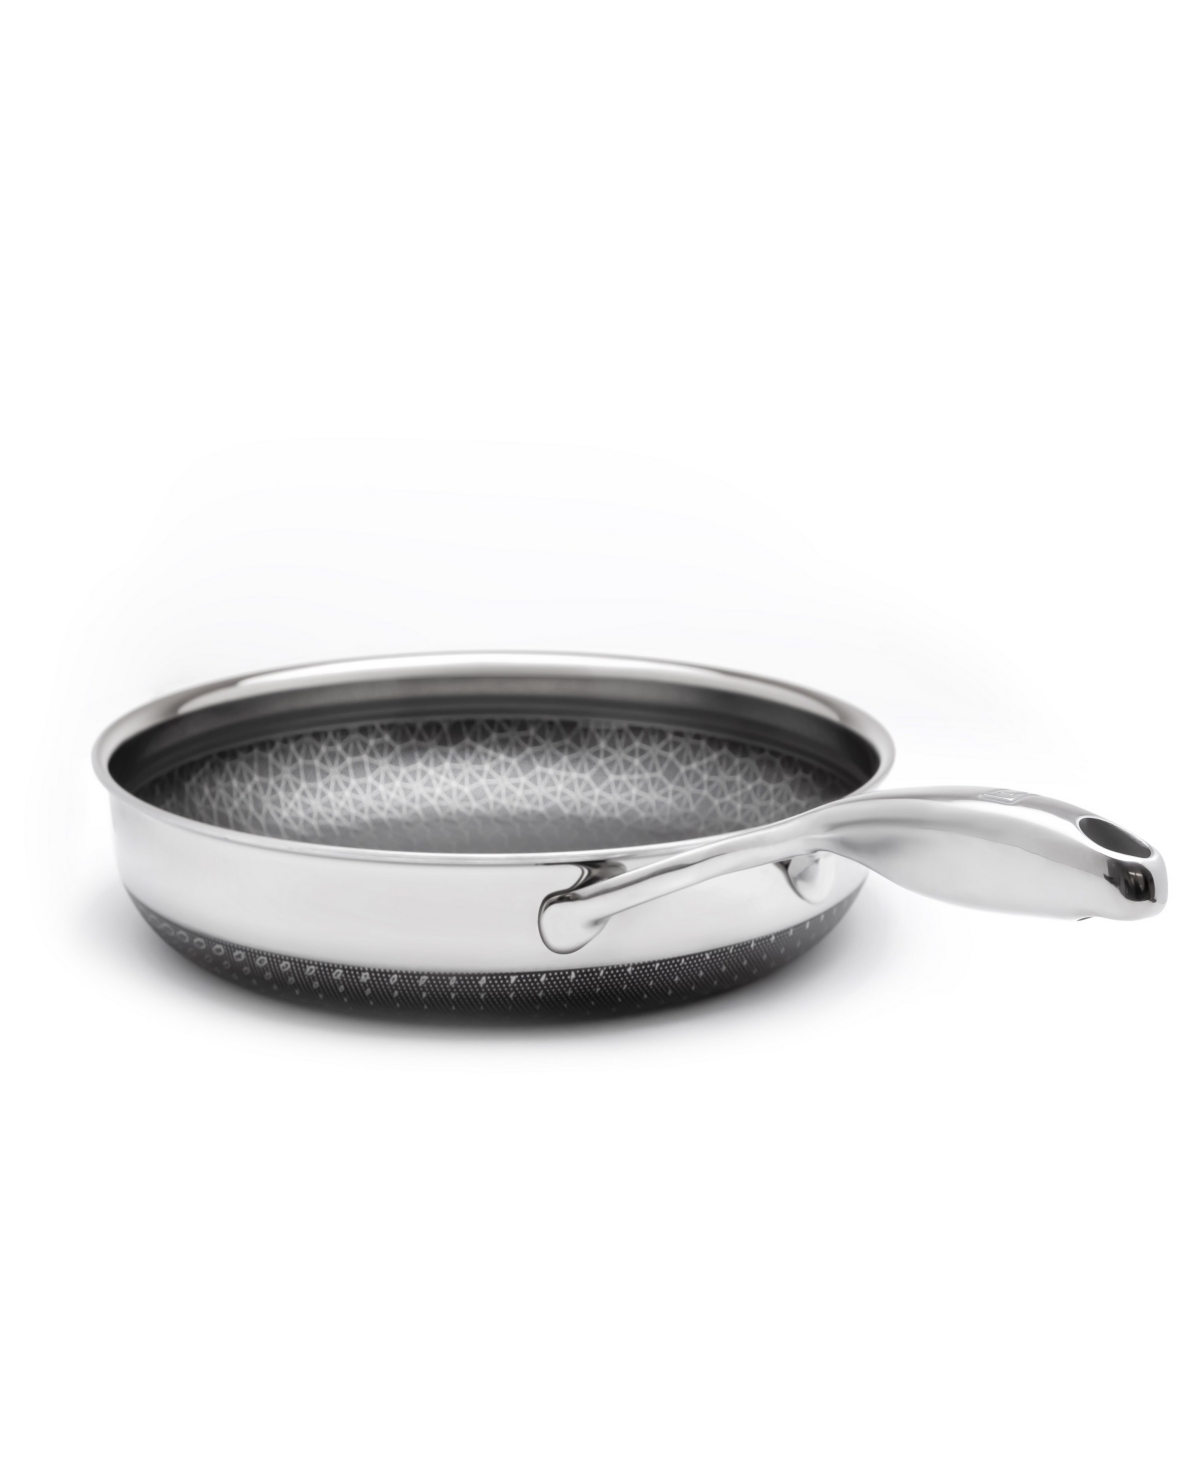 Shop Livwell Diamondclad Stainless Steel Aluminum Core 12" Hybrid Pan In Silver,black